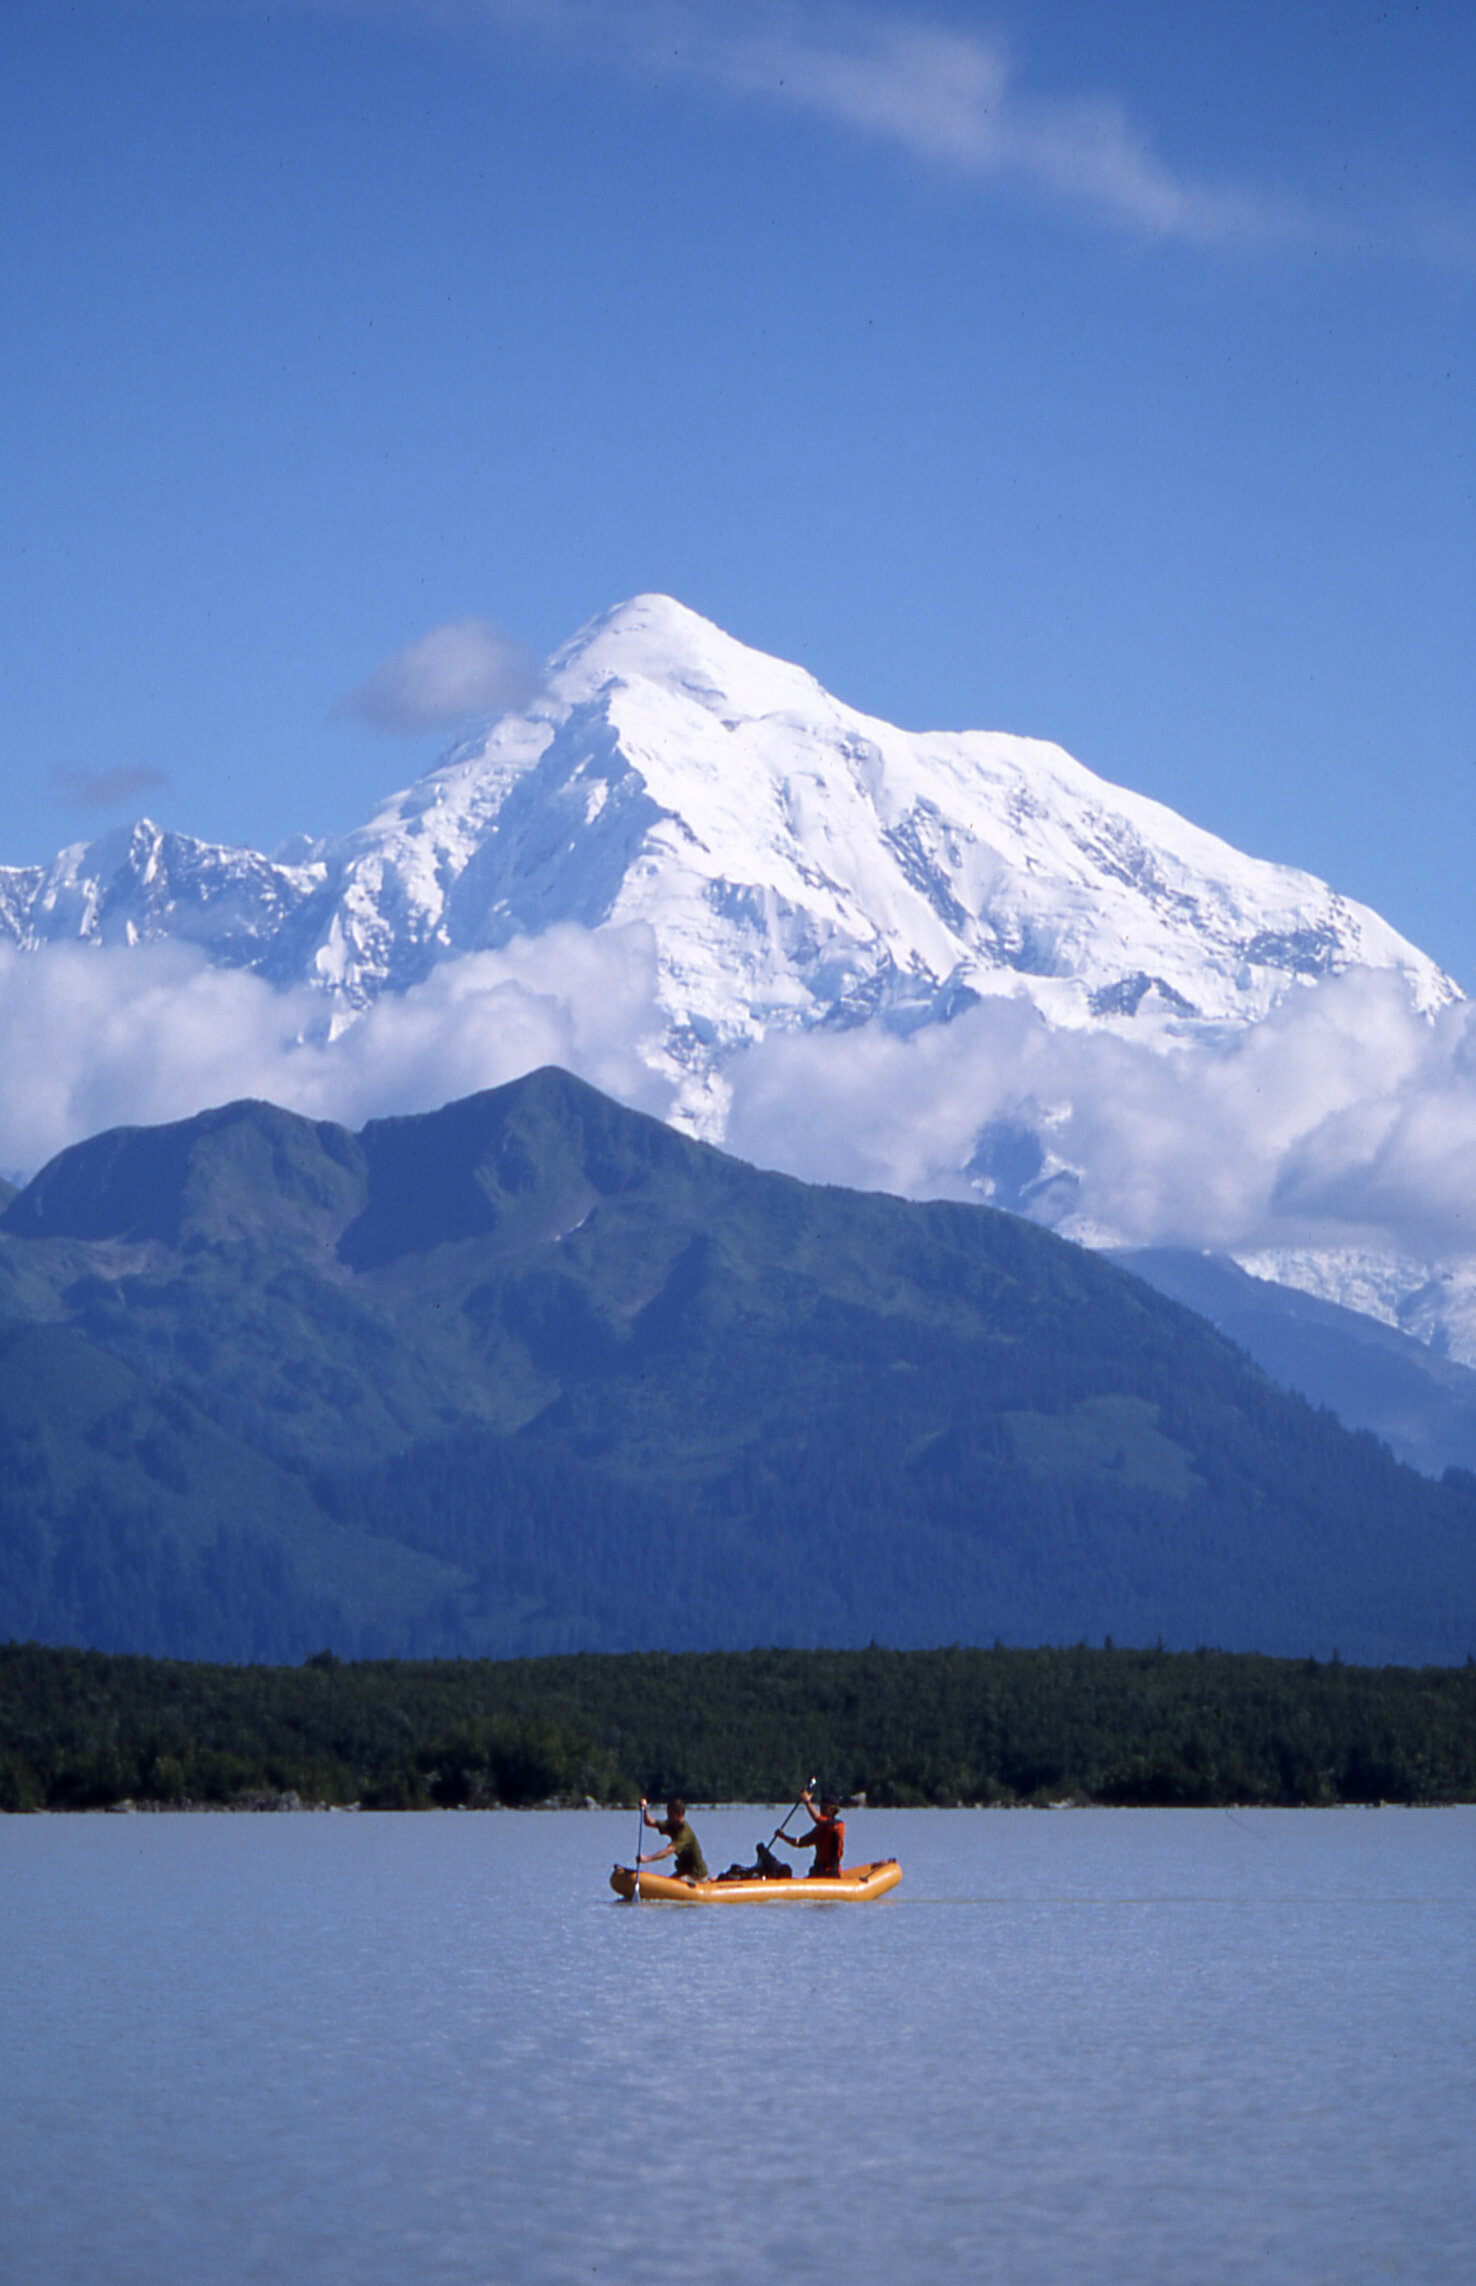  Rupert and Tom paddle in the Grand Plateau Glacial lake with the magnificent Mt. Fairweather in the distance.  